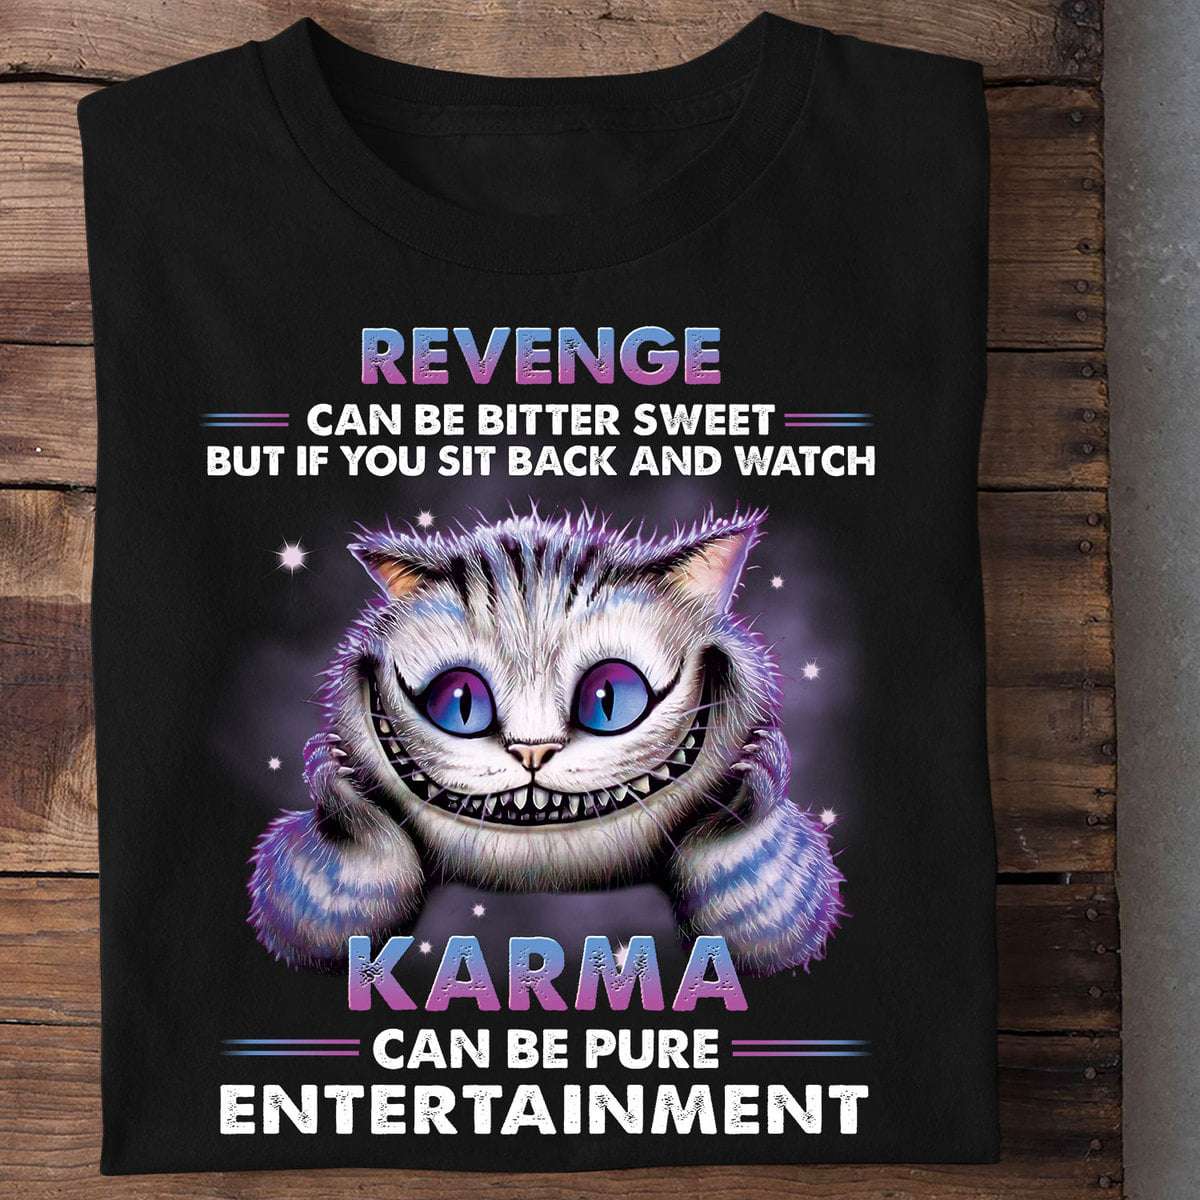 Cheshire Cat - Revenge can be bitter sweet but if you sit back and watch karma can be pure entertainment